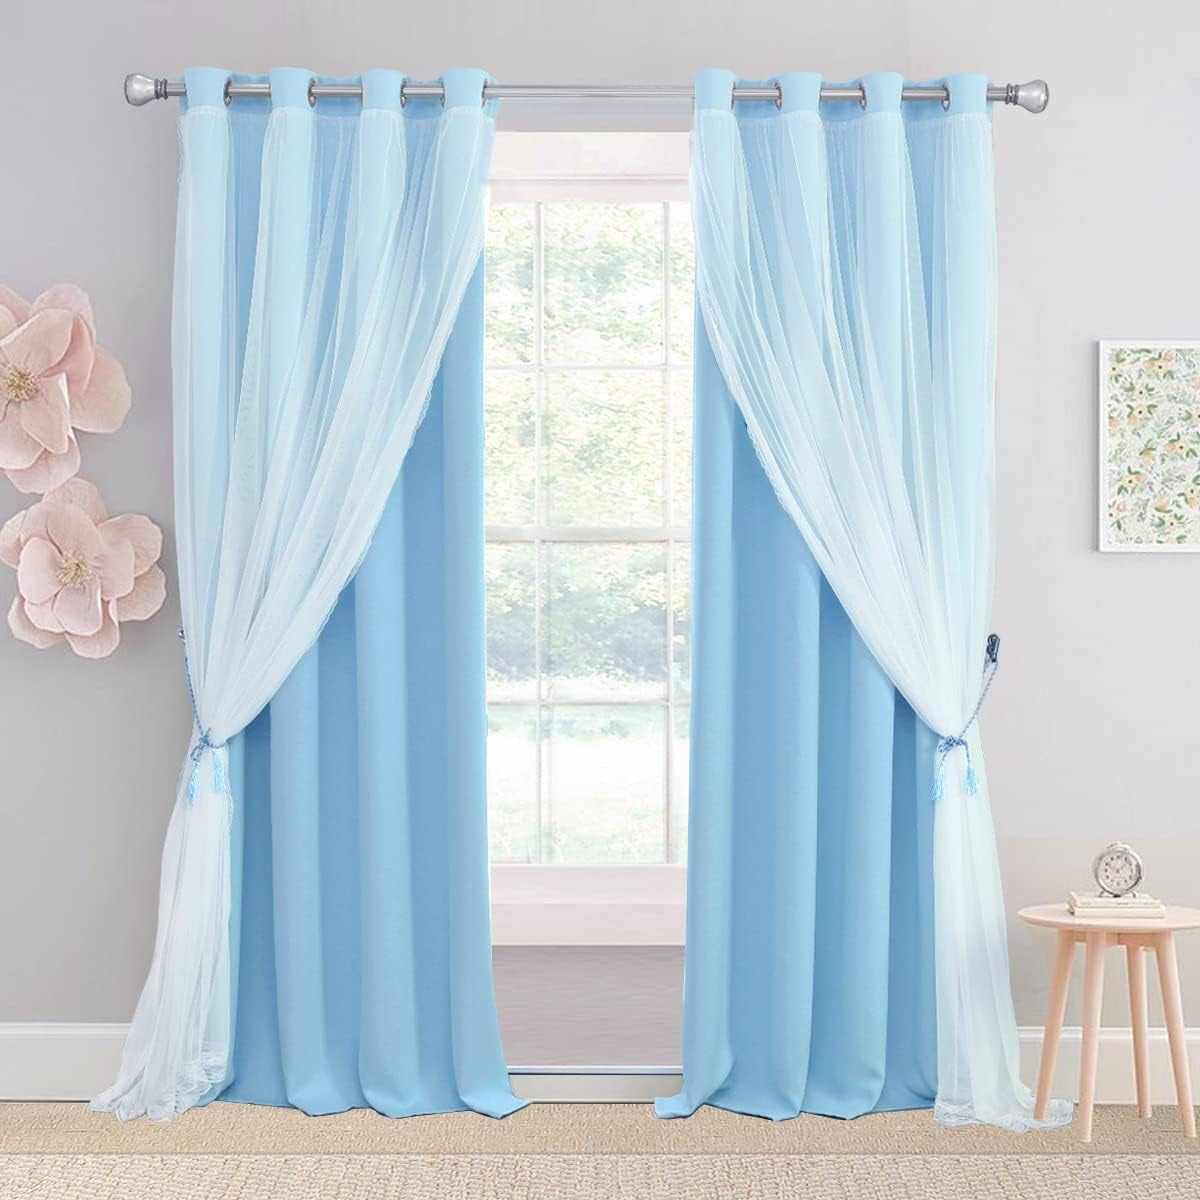 Pink Blackout Curtains 84 Inch Length - Double Layers Princess Girls Curtains & Draperies Panels for Kids Bedroom Living Room Nursery Pink Lace Hem Room Darkening Curtains, 2 Pcs  SOFJAGETQ Sky Blue 52 X 90 